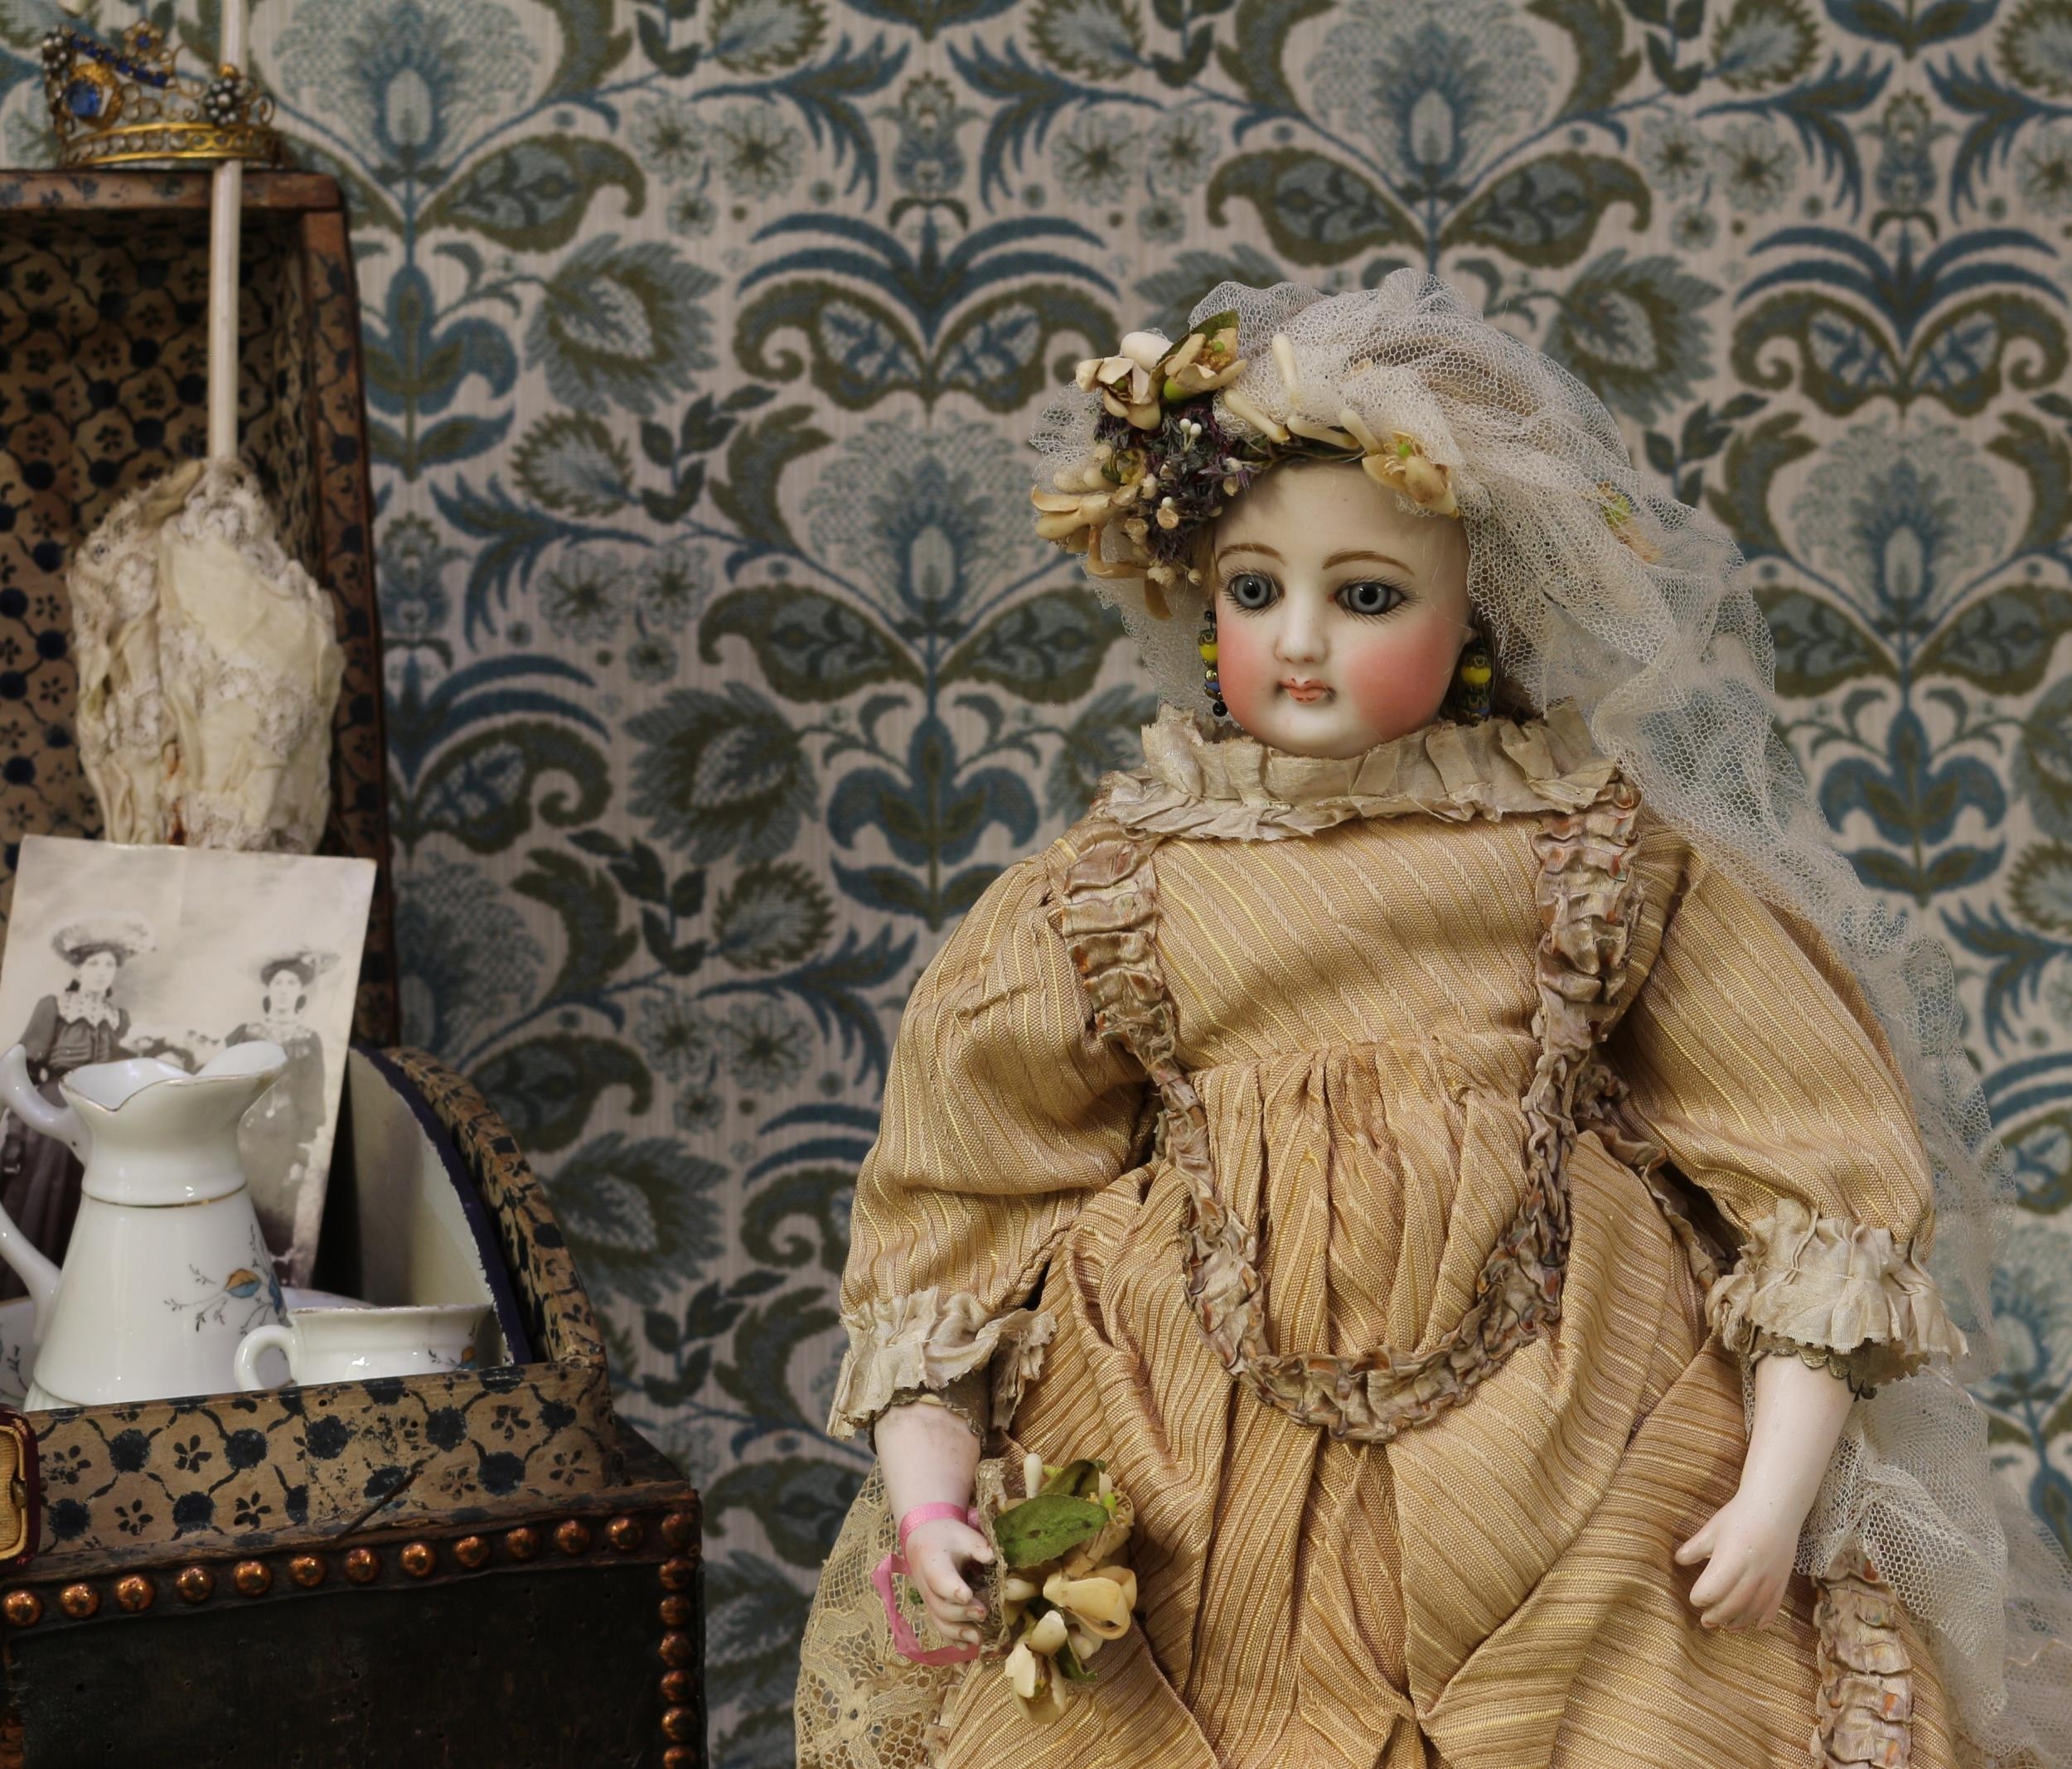 A 19th century pale bisque head French Poupée de Mode or fashion doll, attributed to Francois - Image 2 of 5